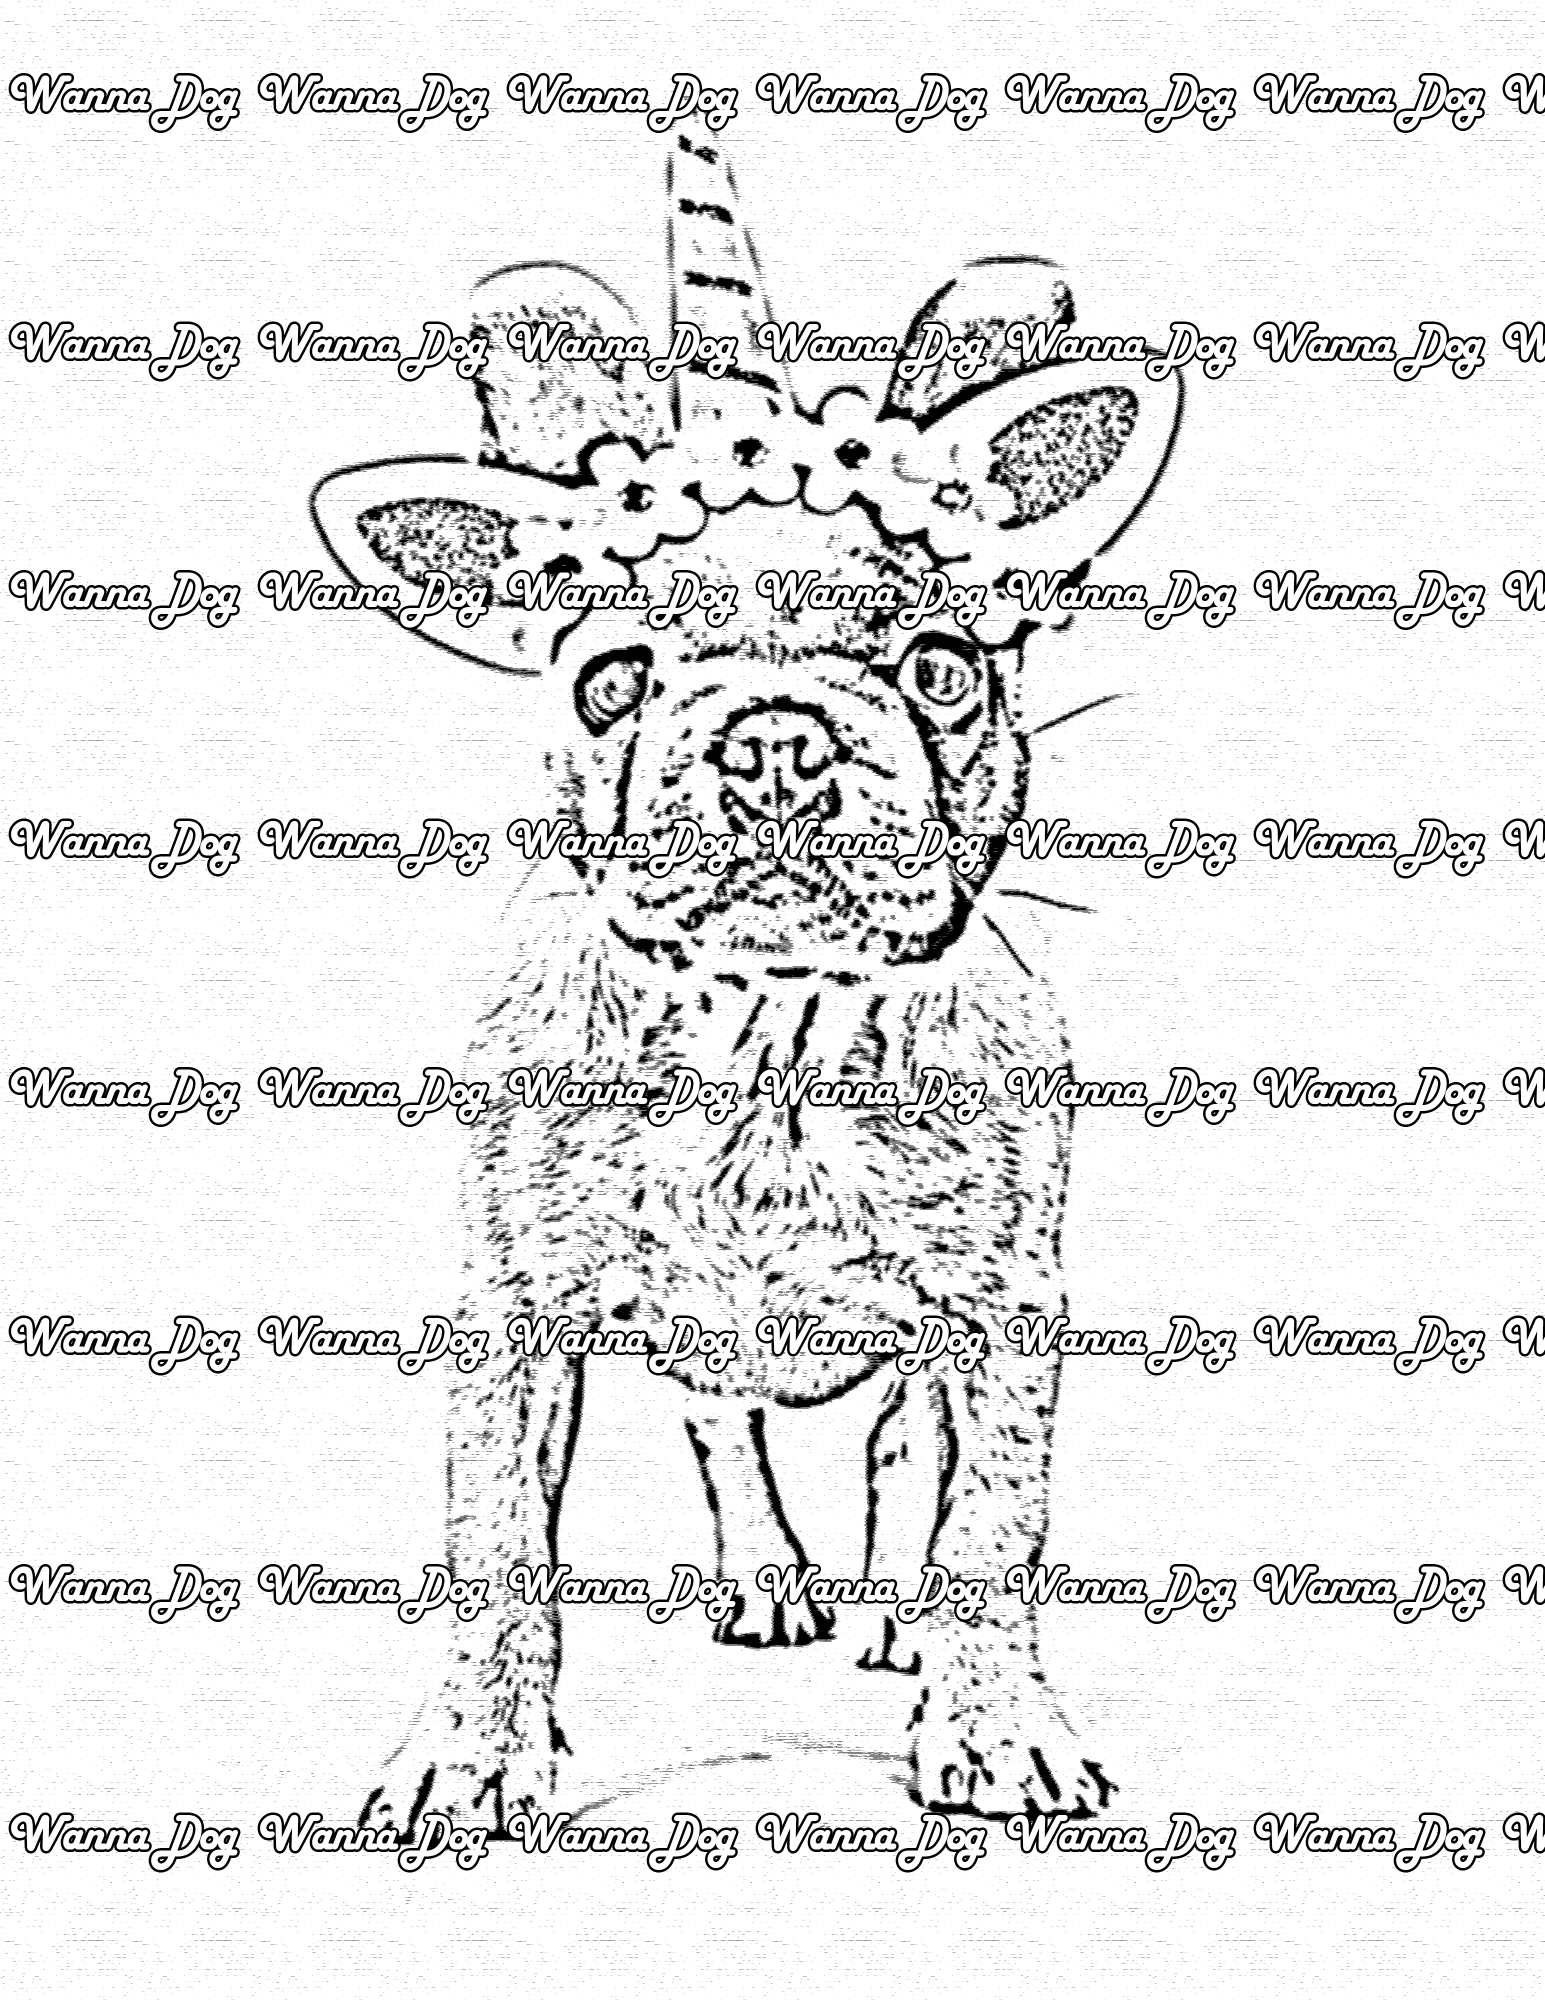 French Bulldog Coloring Page of a French Bulldog with a horn and flower crown